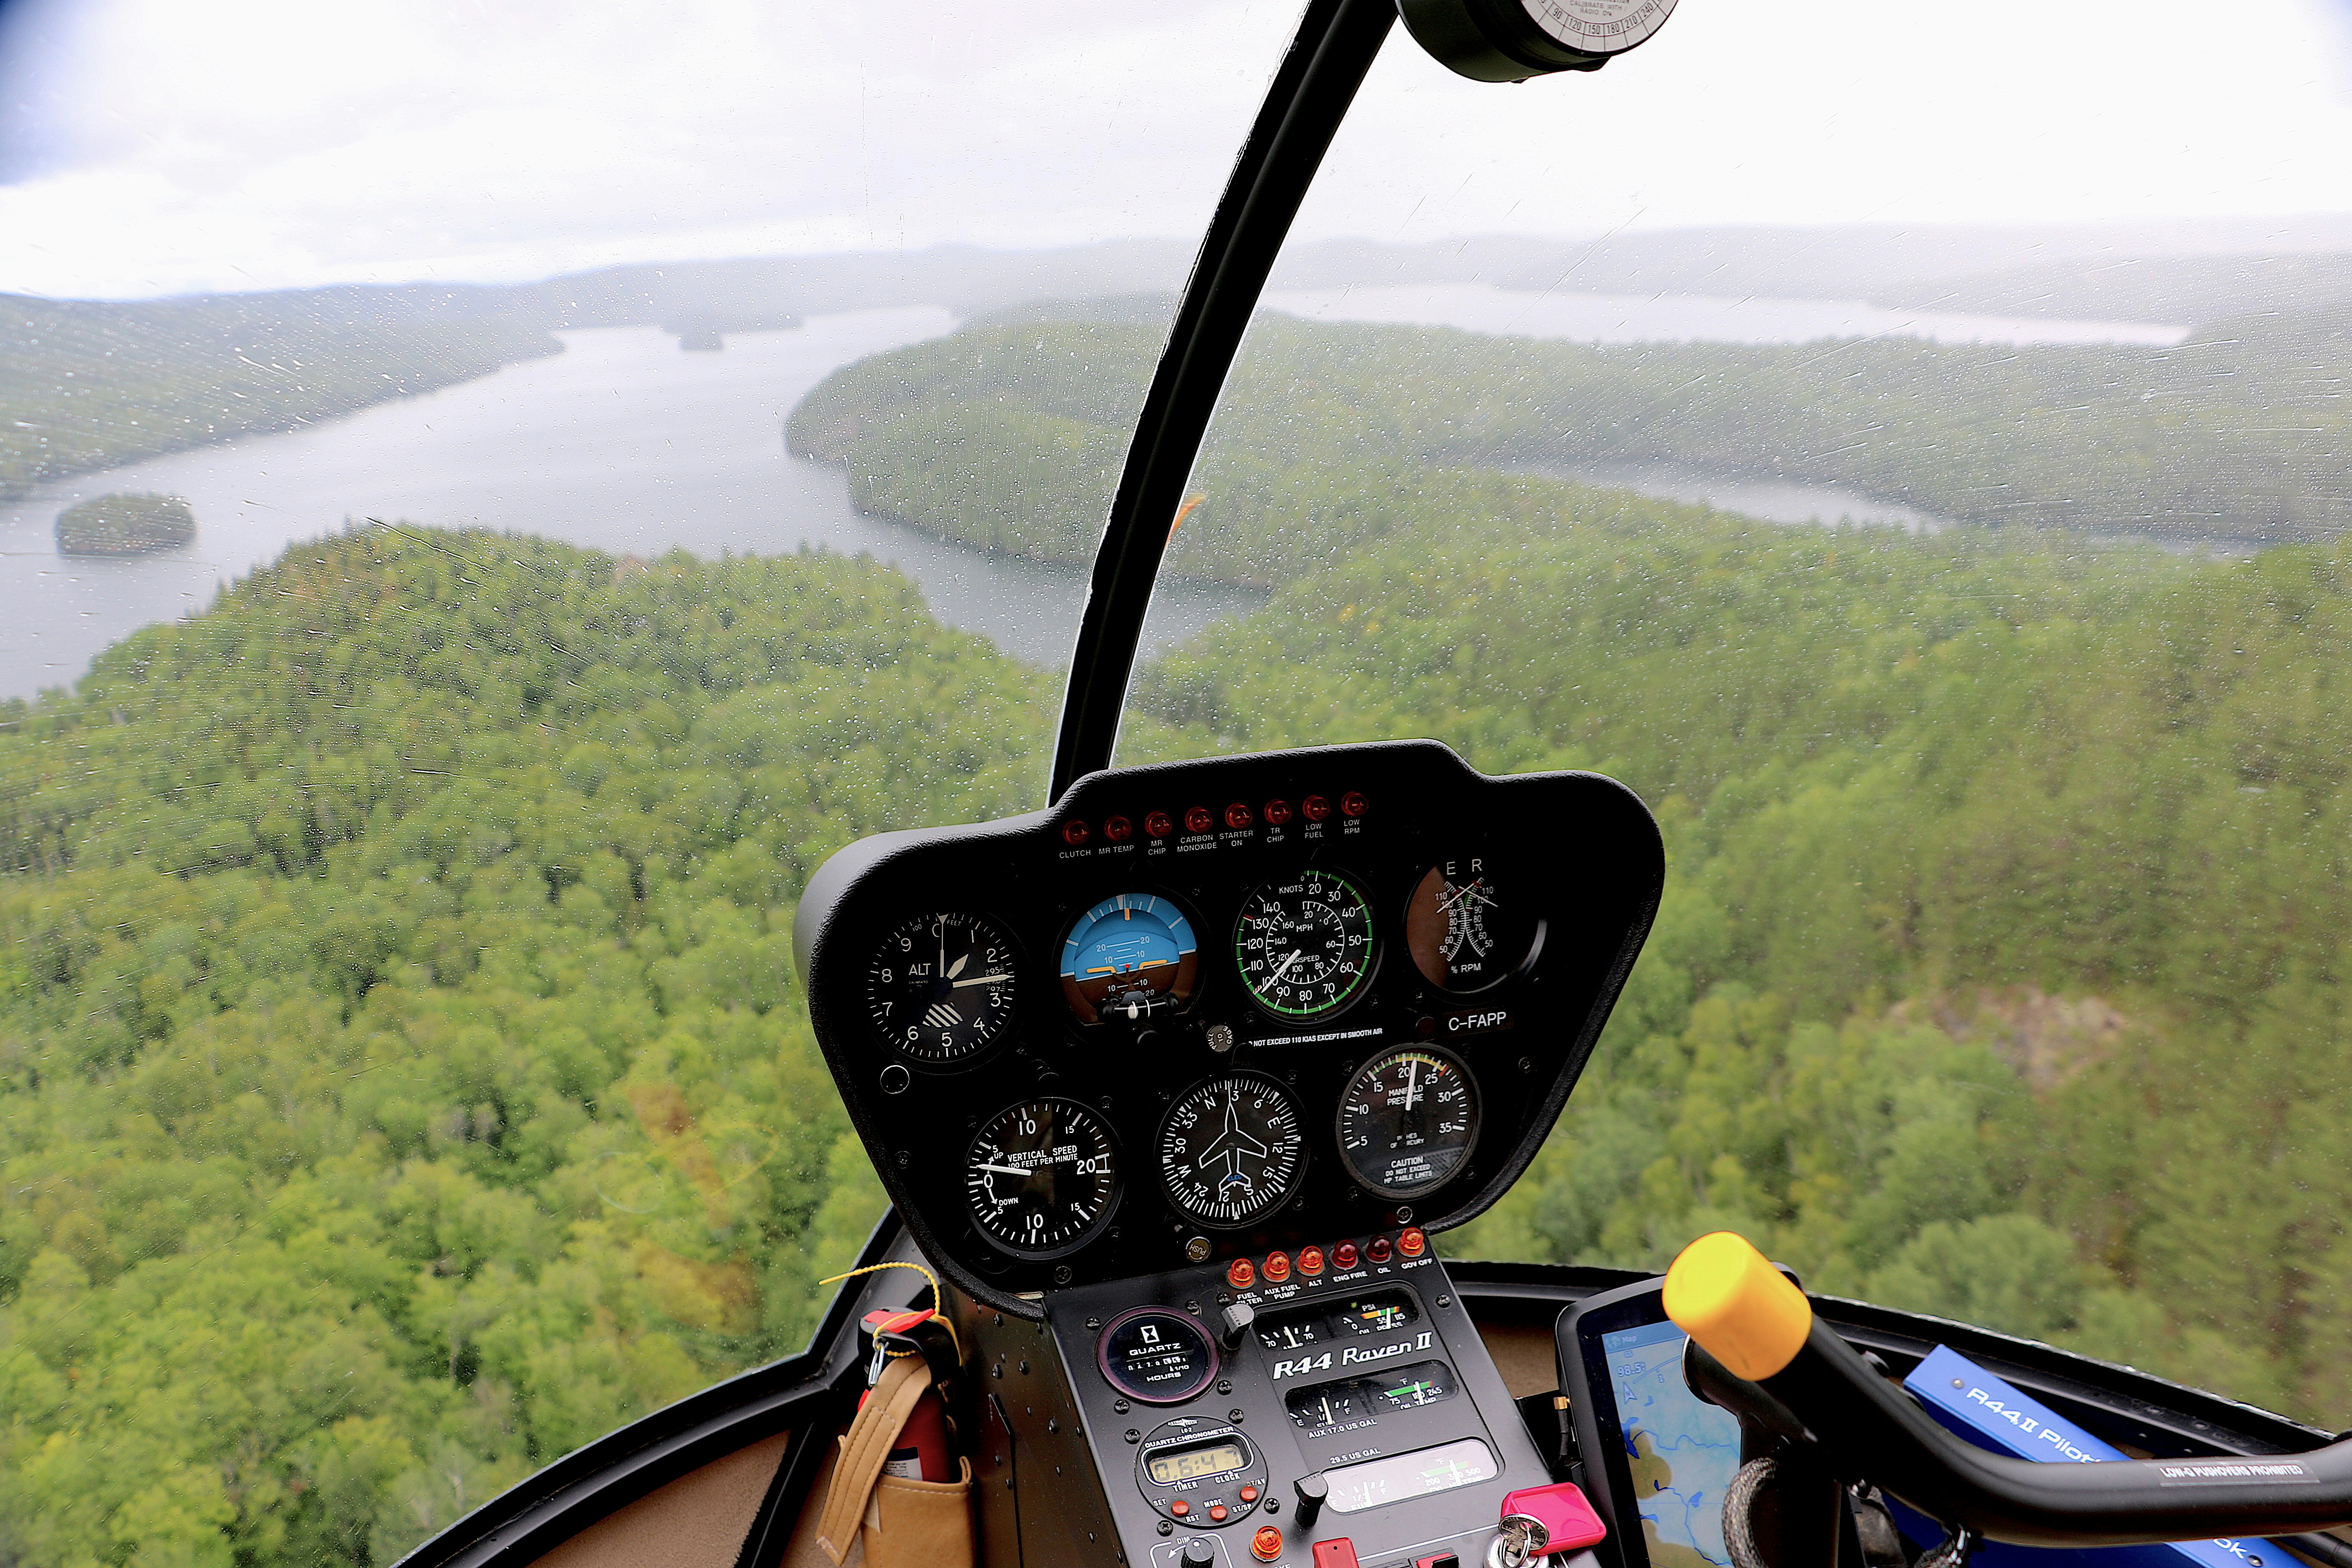 The flight controls of a small helicopter over a wilderness area in Quebec